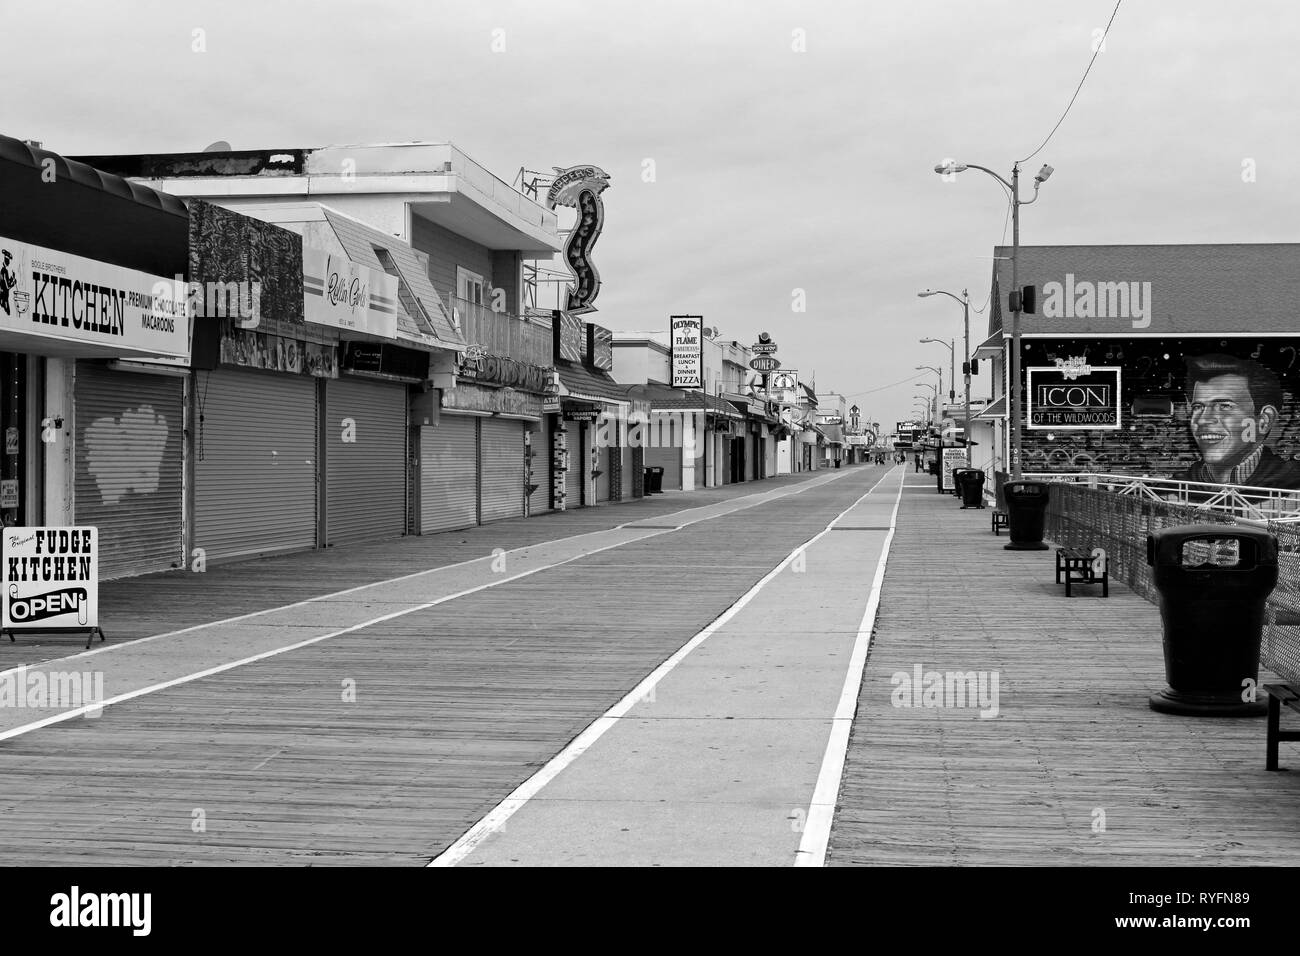 Boardwalk off season in black and white. Wildwood by the Sea, New Jersey, USA Stock Photo